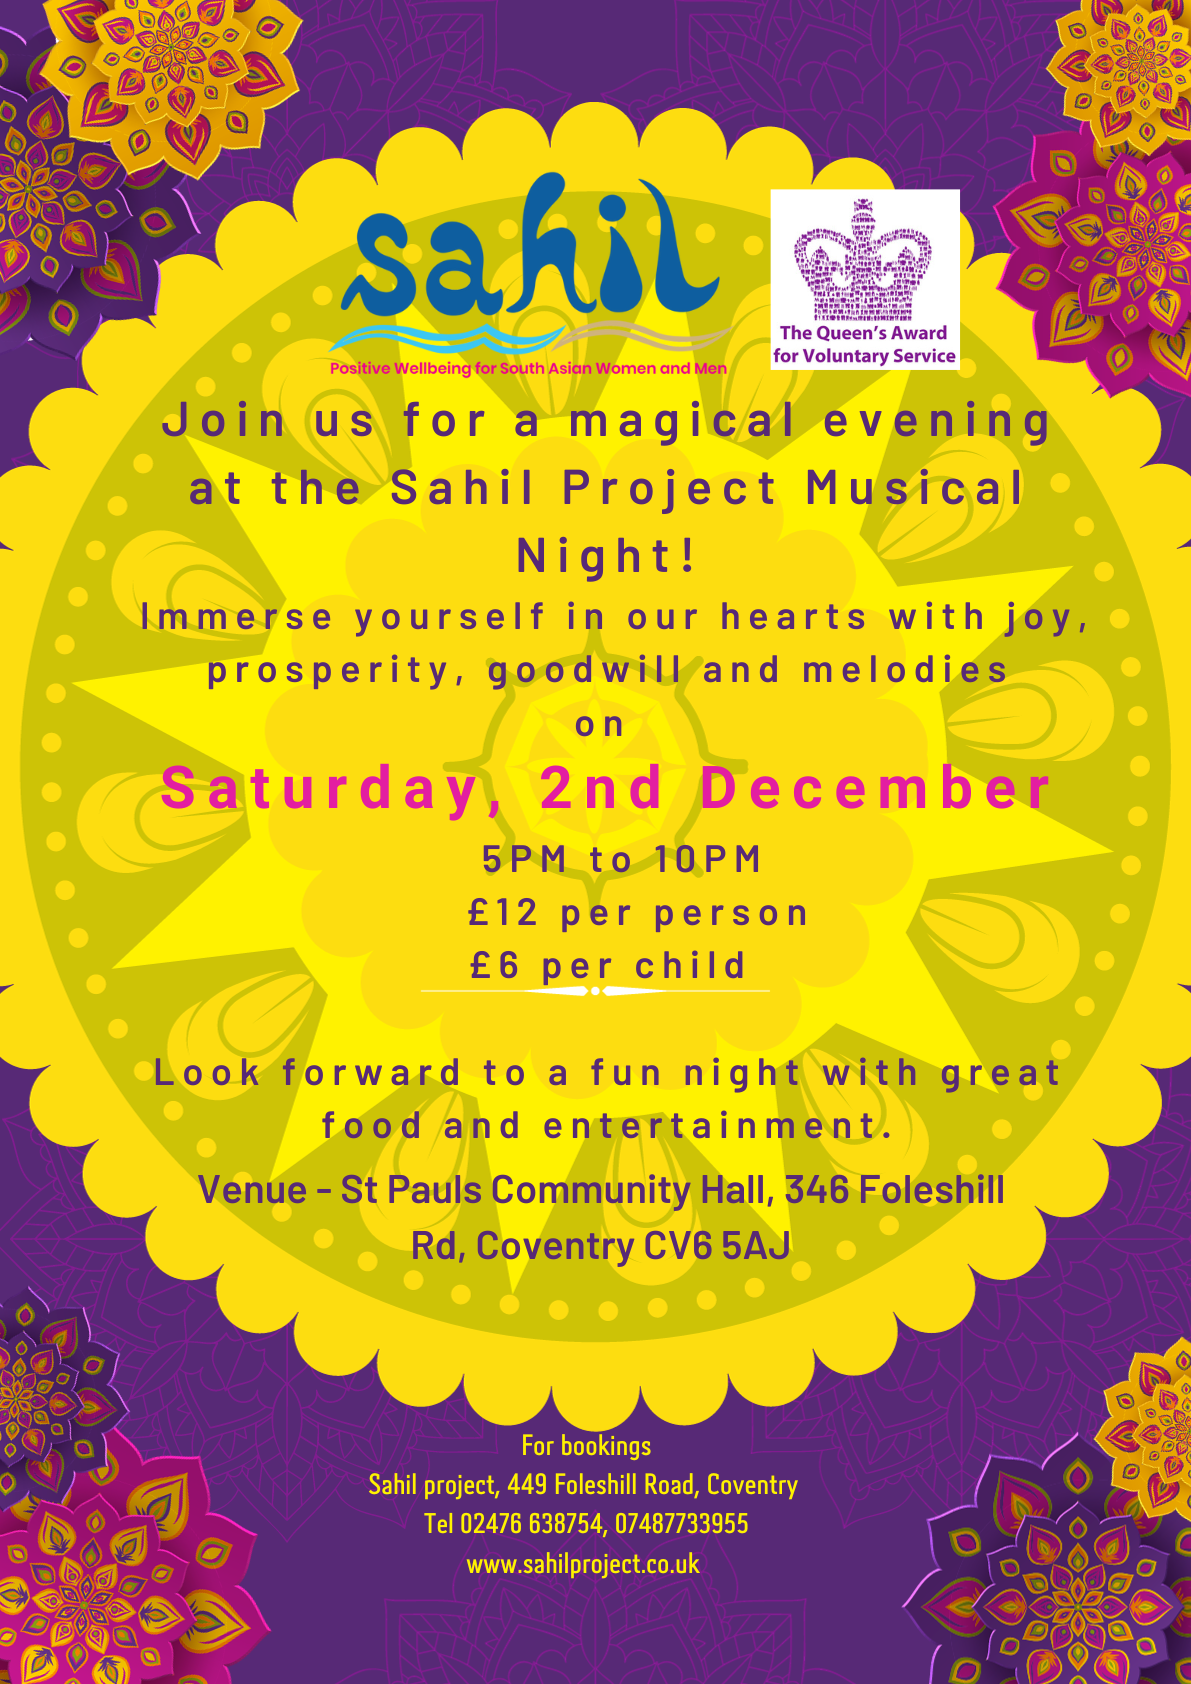 Sahilproject musical night, indian music show, talented singers, foleshill road event, saturday , food music and entertainment , upcoming talent, music curing mental health